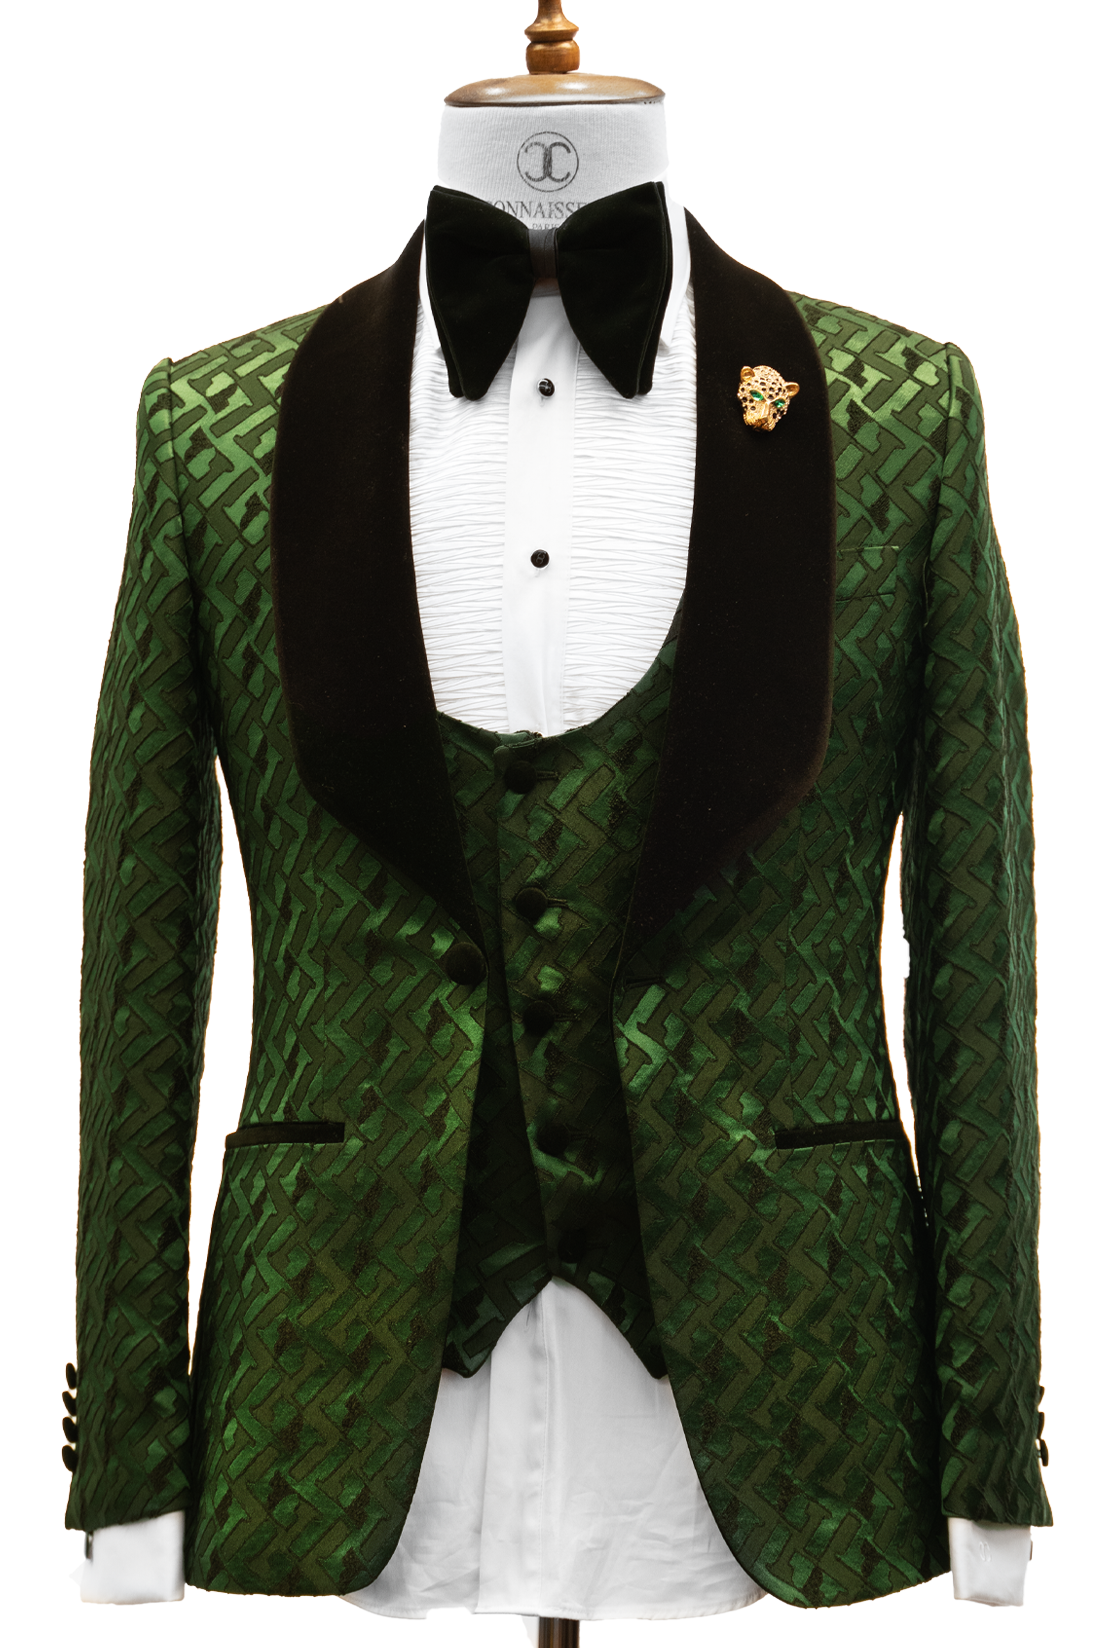 CONNAISSEUR - FOREST GREEN WITH H PATTERN 3-PIECE SLIM FIT TUXEDO WITH U VEST